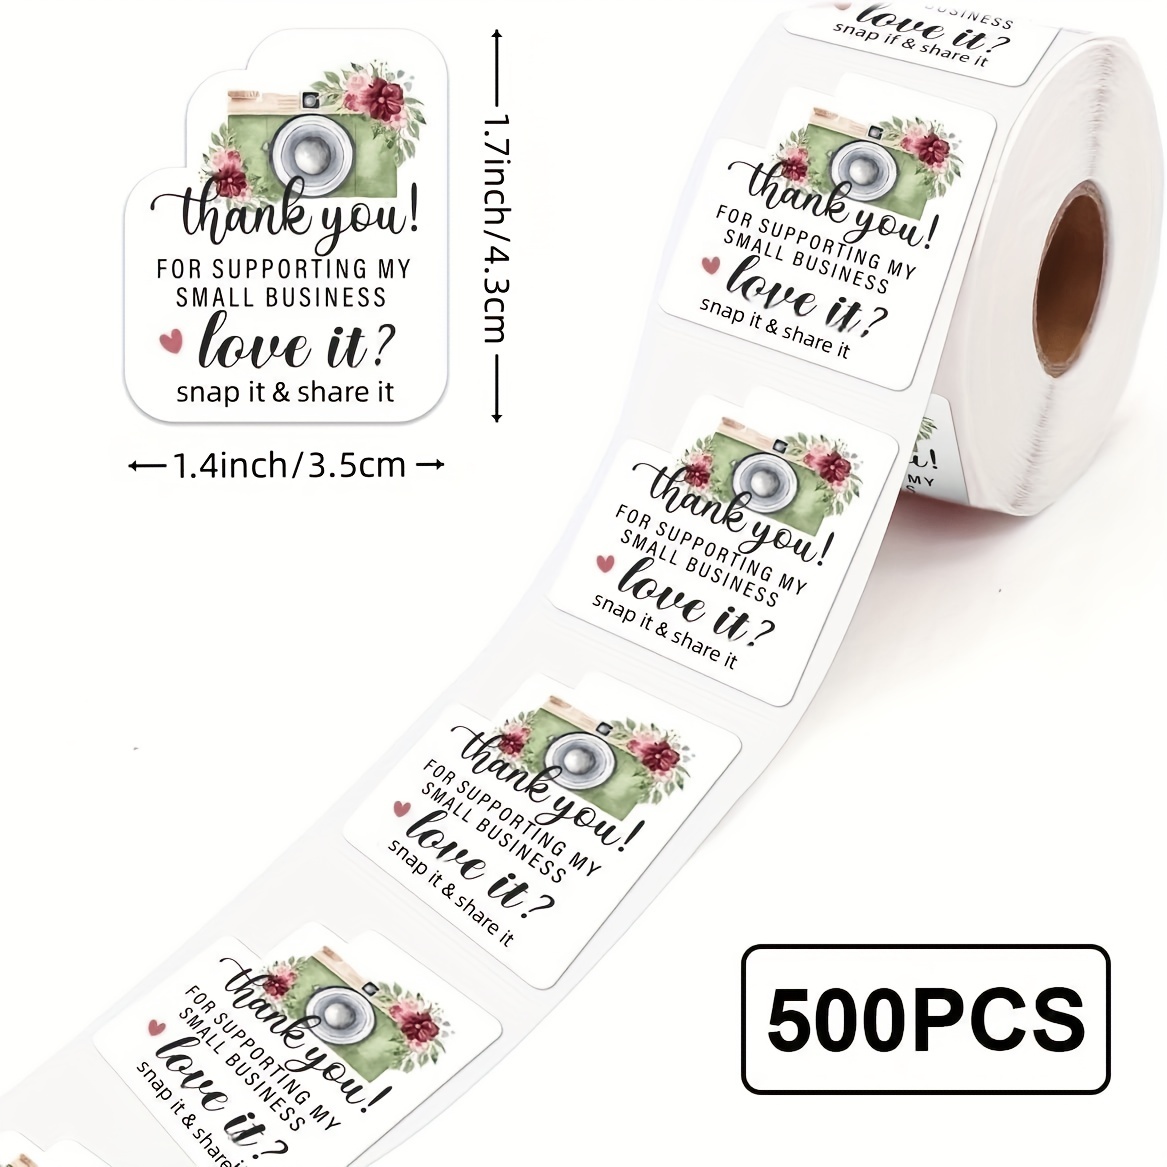 1.5 Handmade with Love Stickers Roll - Packing Stickers - Thank You Labels for Favors - Small Business Thank You Stickers | 500 Pcs